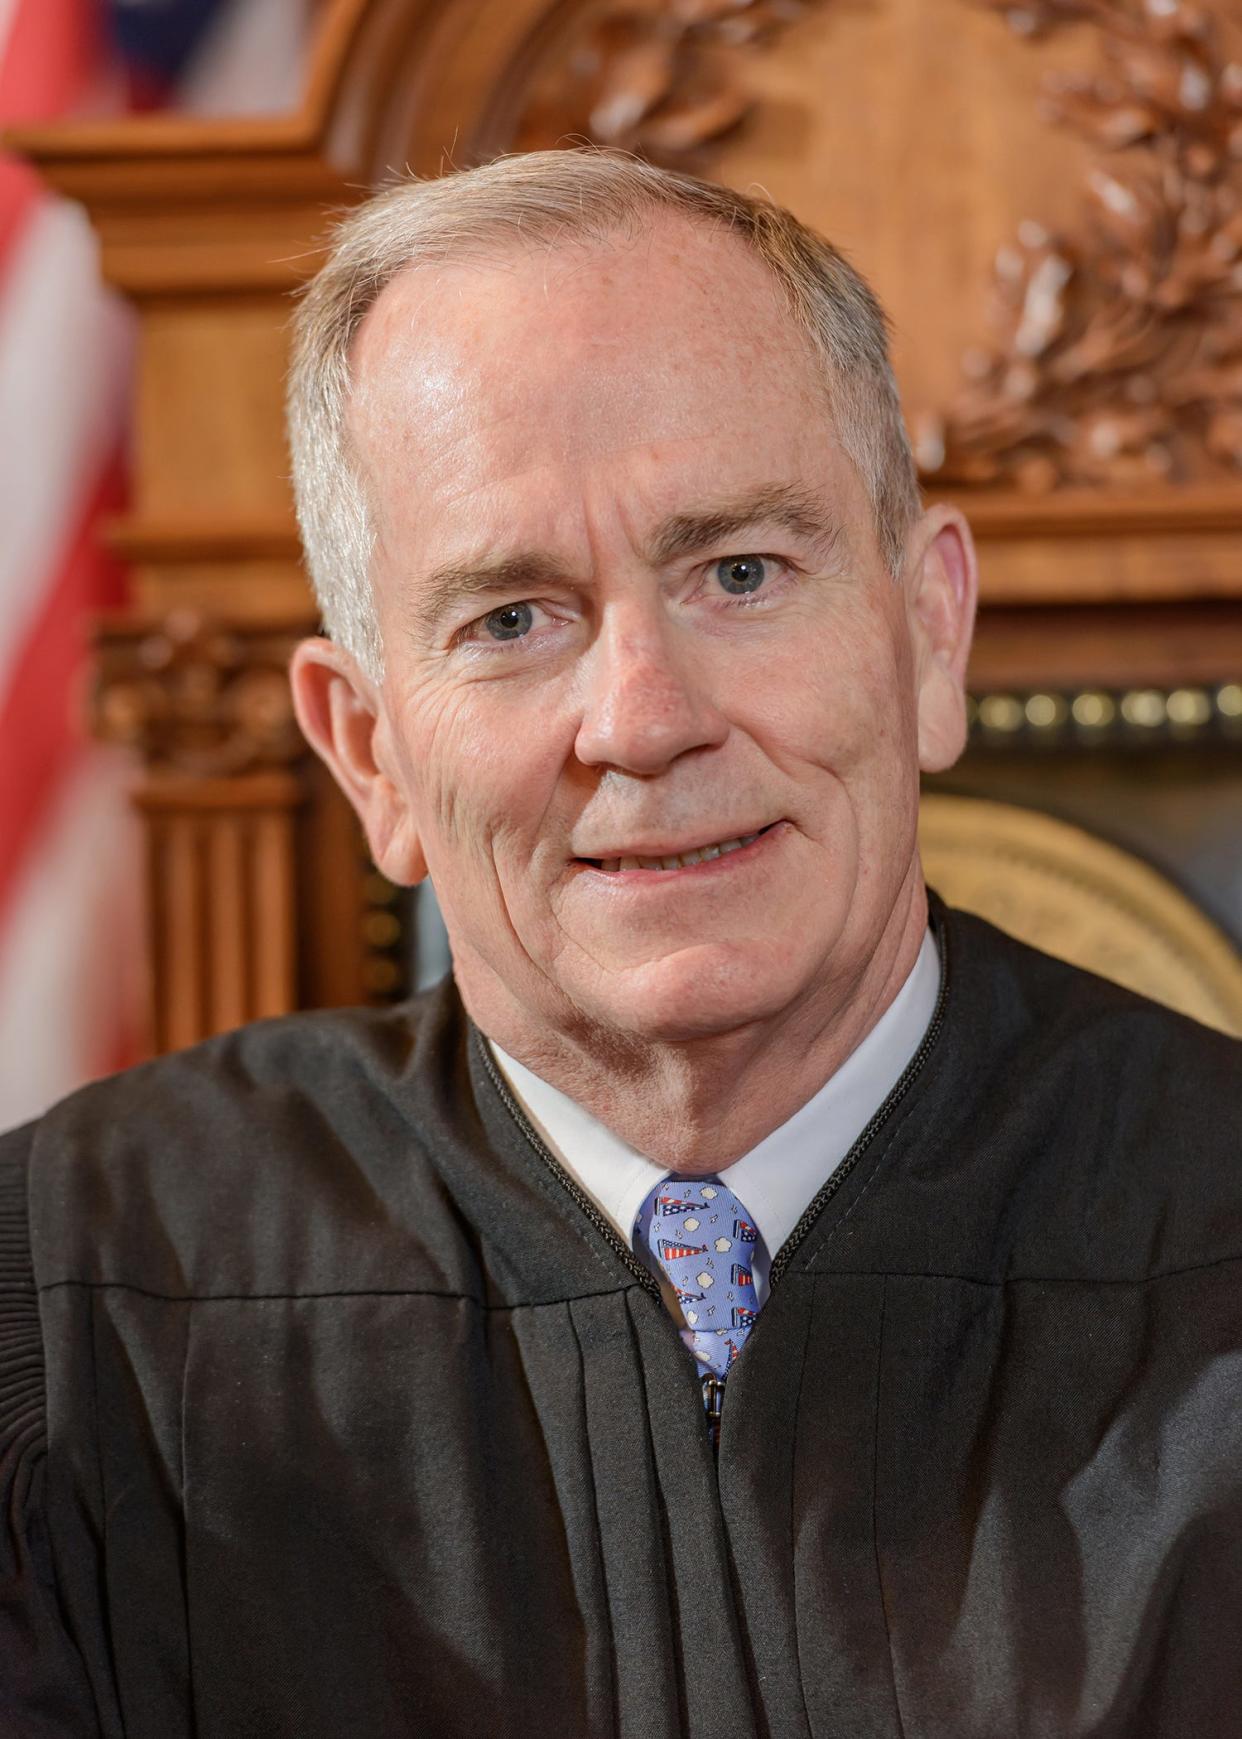 Chief Justice of the Kentucky Supreme Court Laurance B. VanMeter, serving the 5th Supreme Court District, is photographed Wednesday, Jan. 11, 2023, in the Supreme Court Chambers at the State Capitol in Frankfort, Ky. (AOC photo/Brian Bohannon)